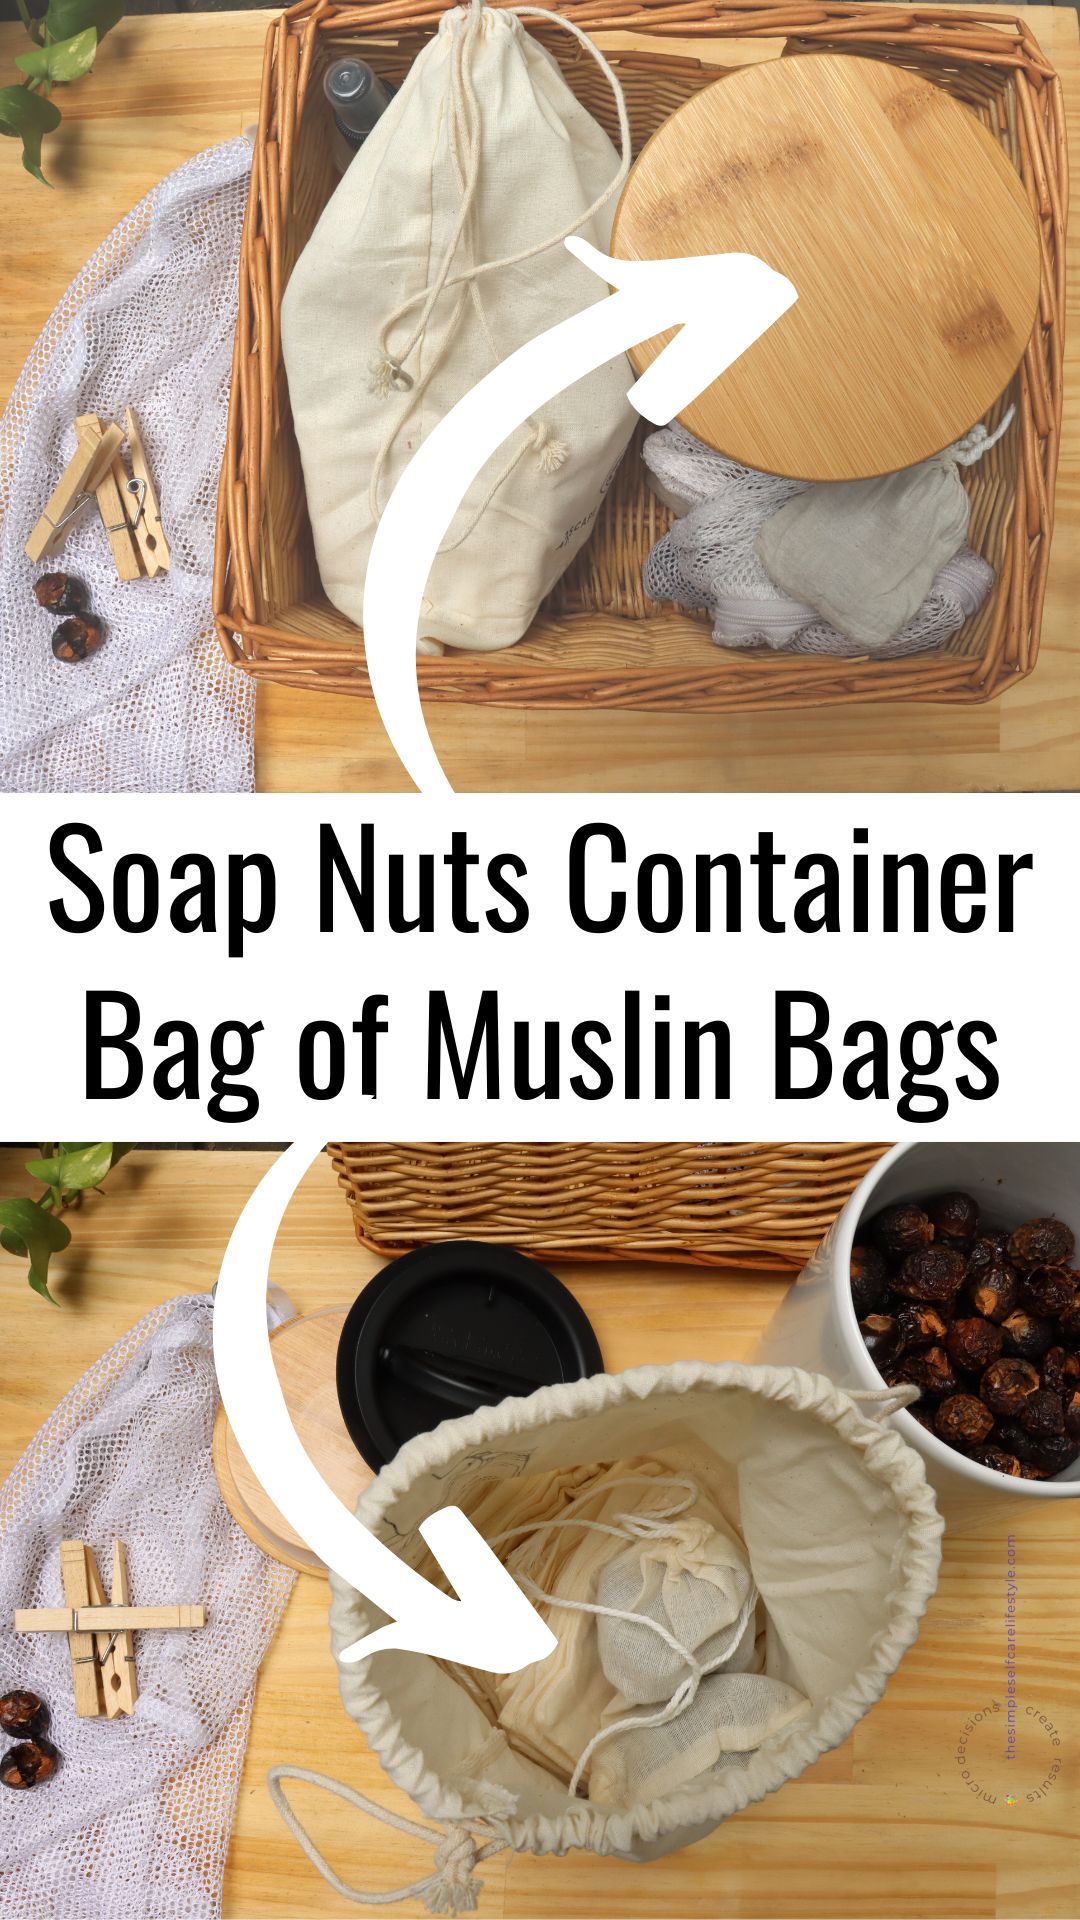 non-toxic laundry detergent. How I store the wash nuts The Simple Self Care Lifestyle